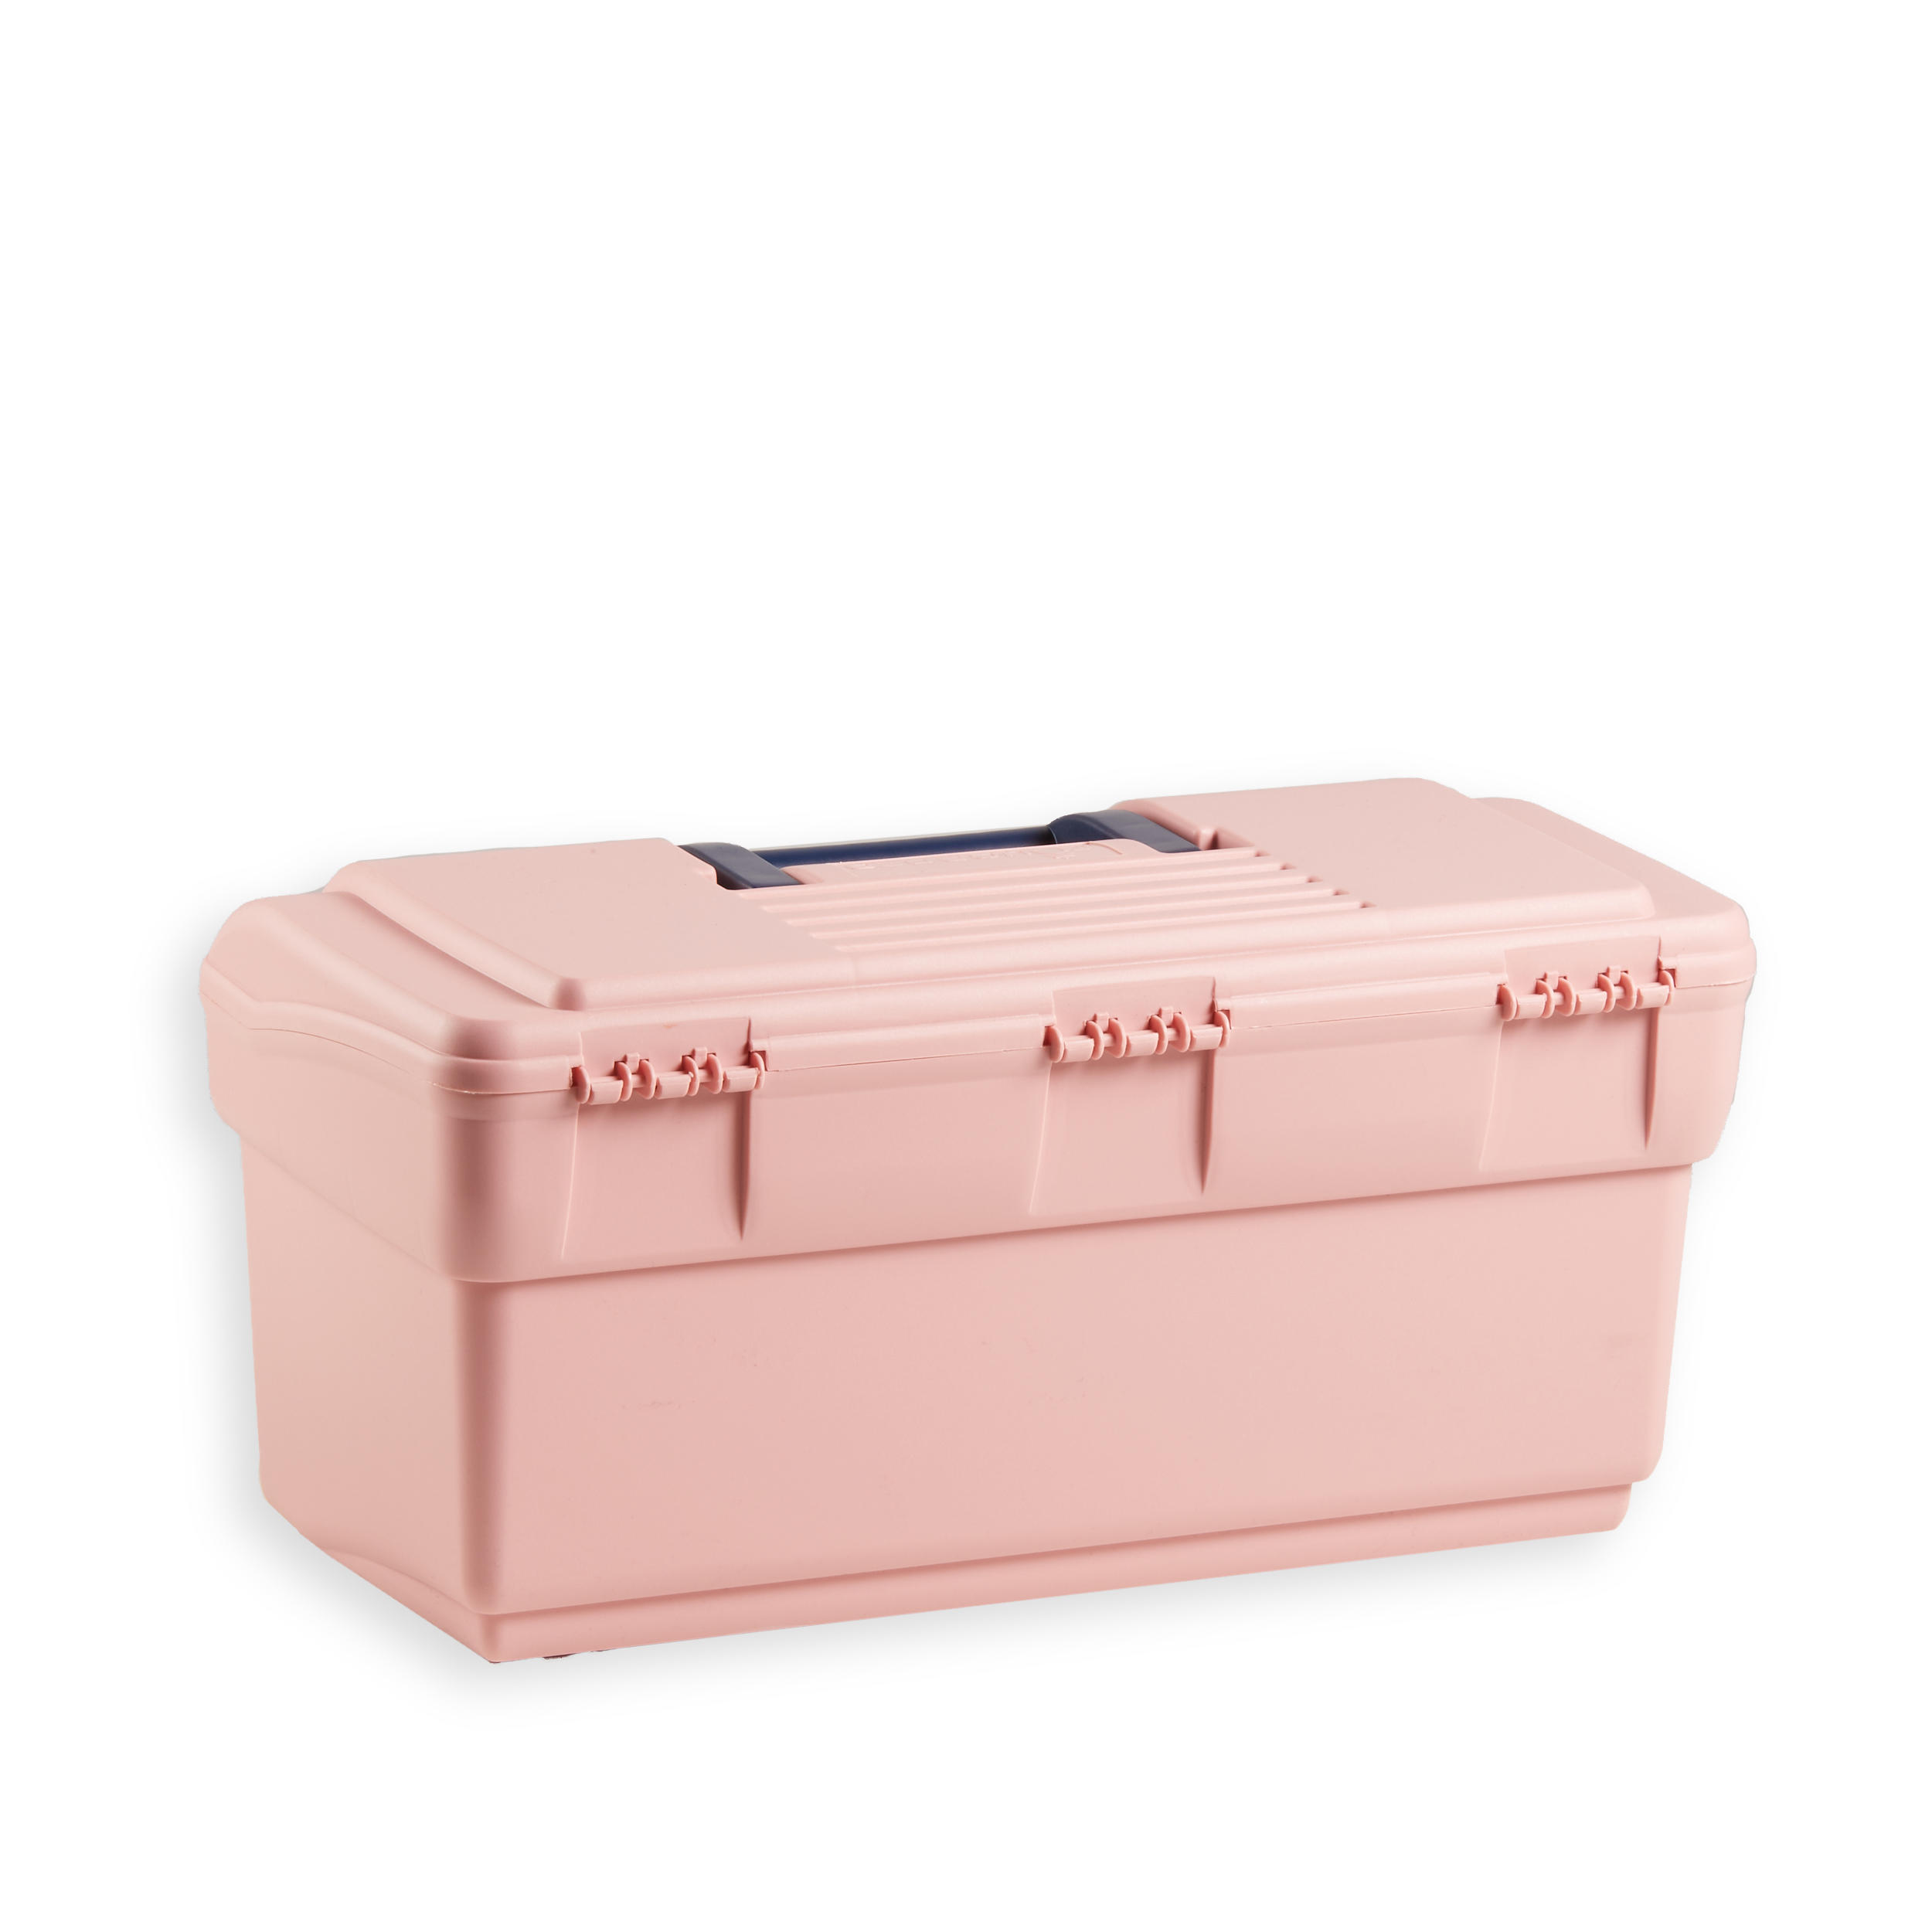 Horse Riding Grooming Case 300 - Pink / Navy 2/5